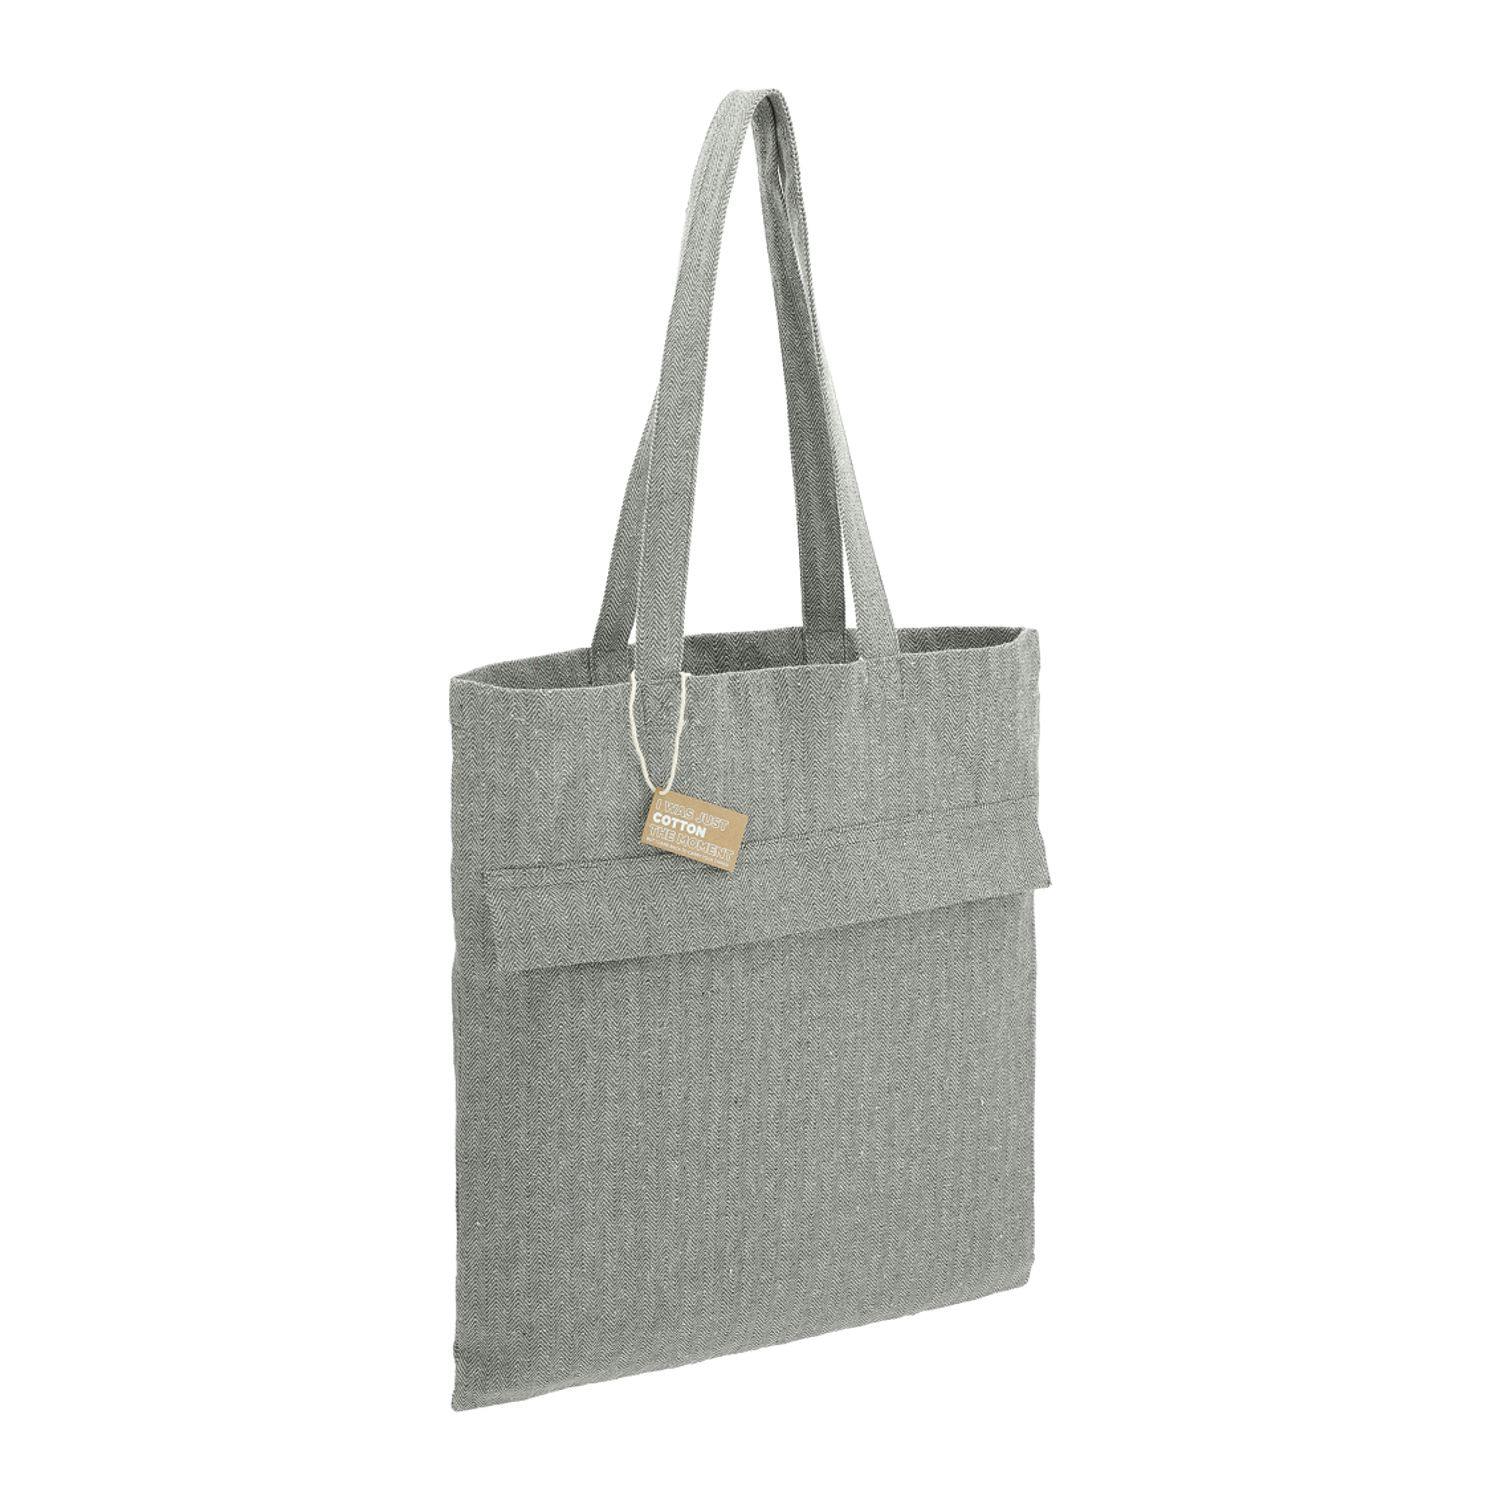 Recycled Cotton Herringbone Tote w/Zip Pocket - additional Image 2